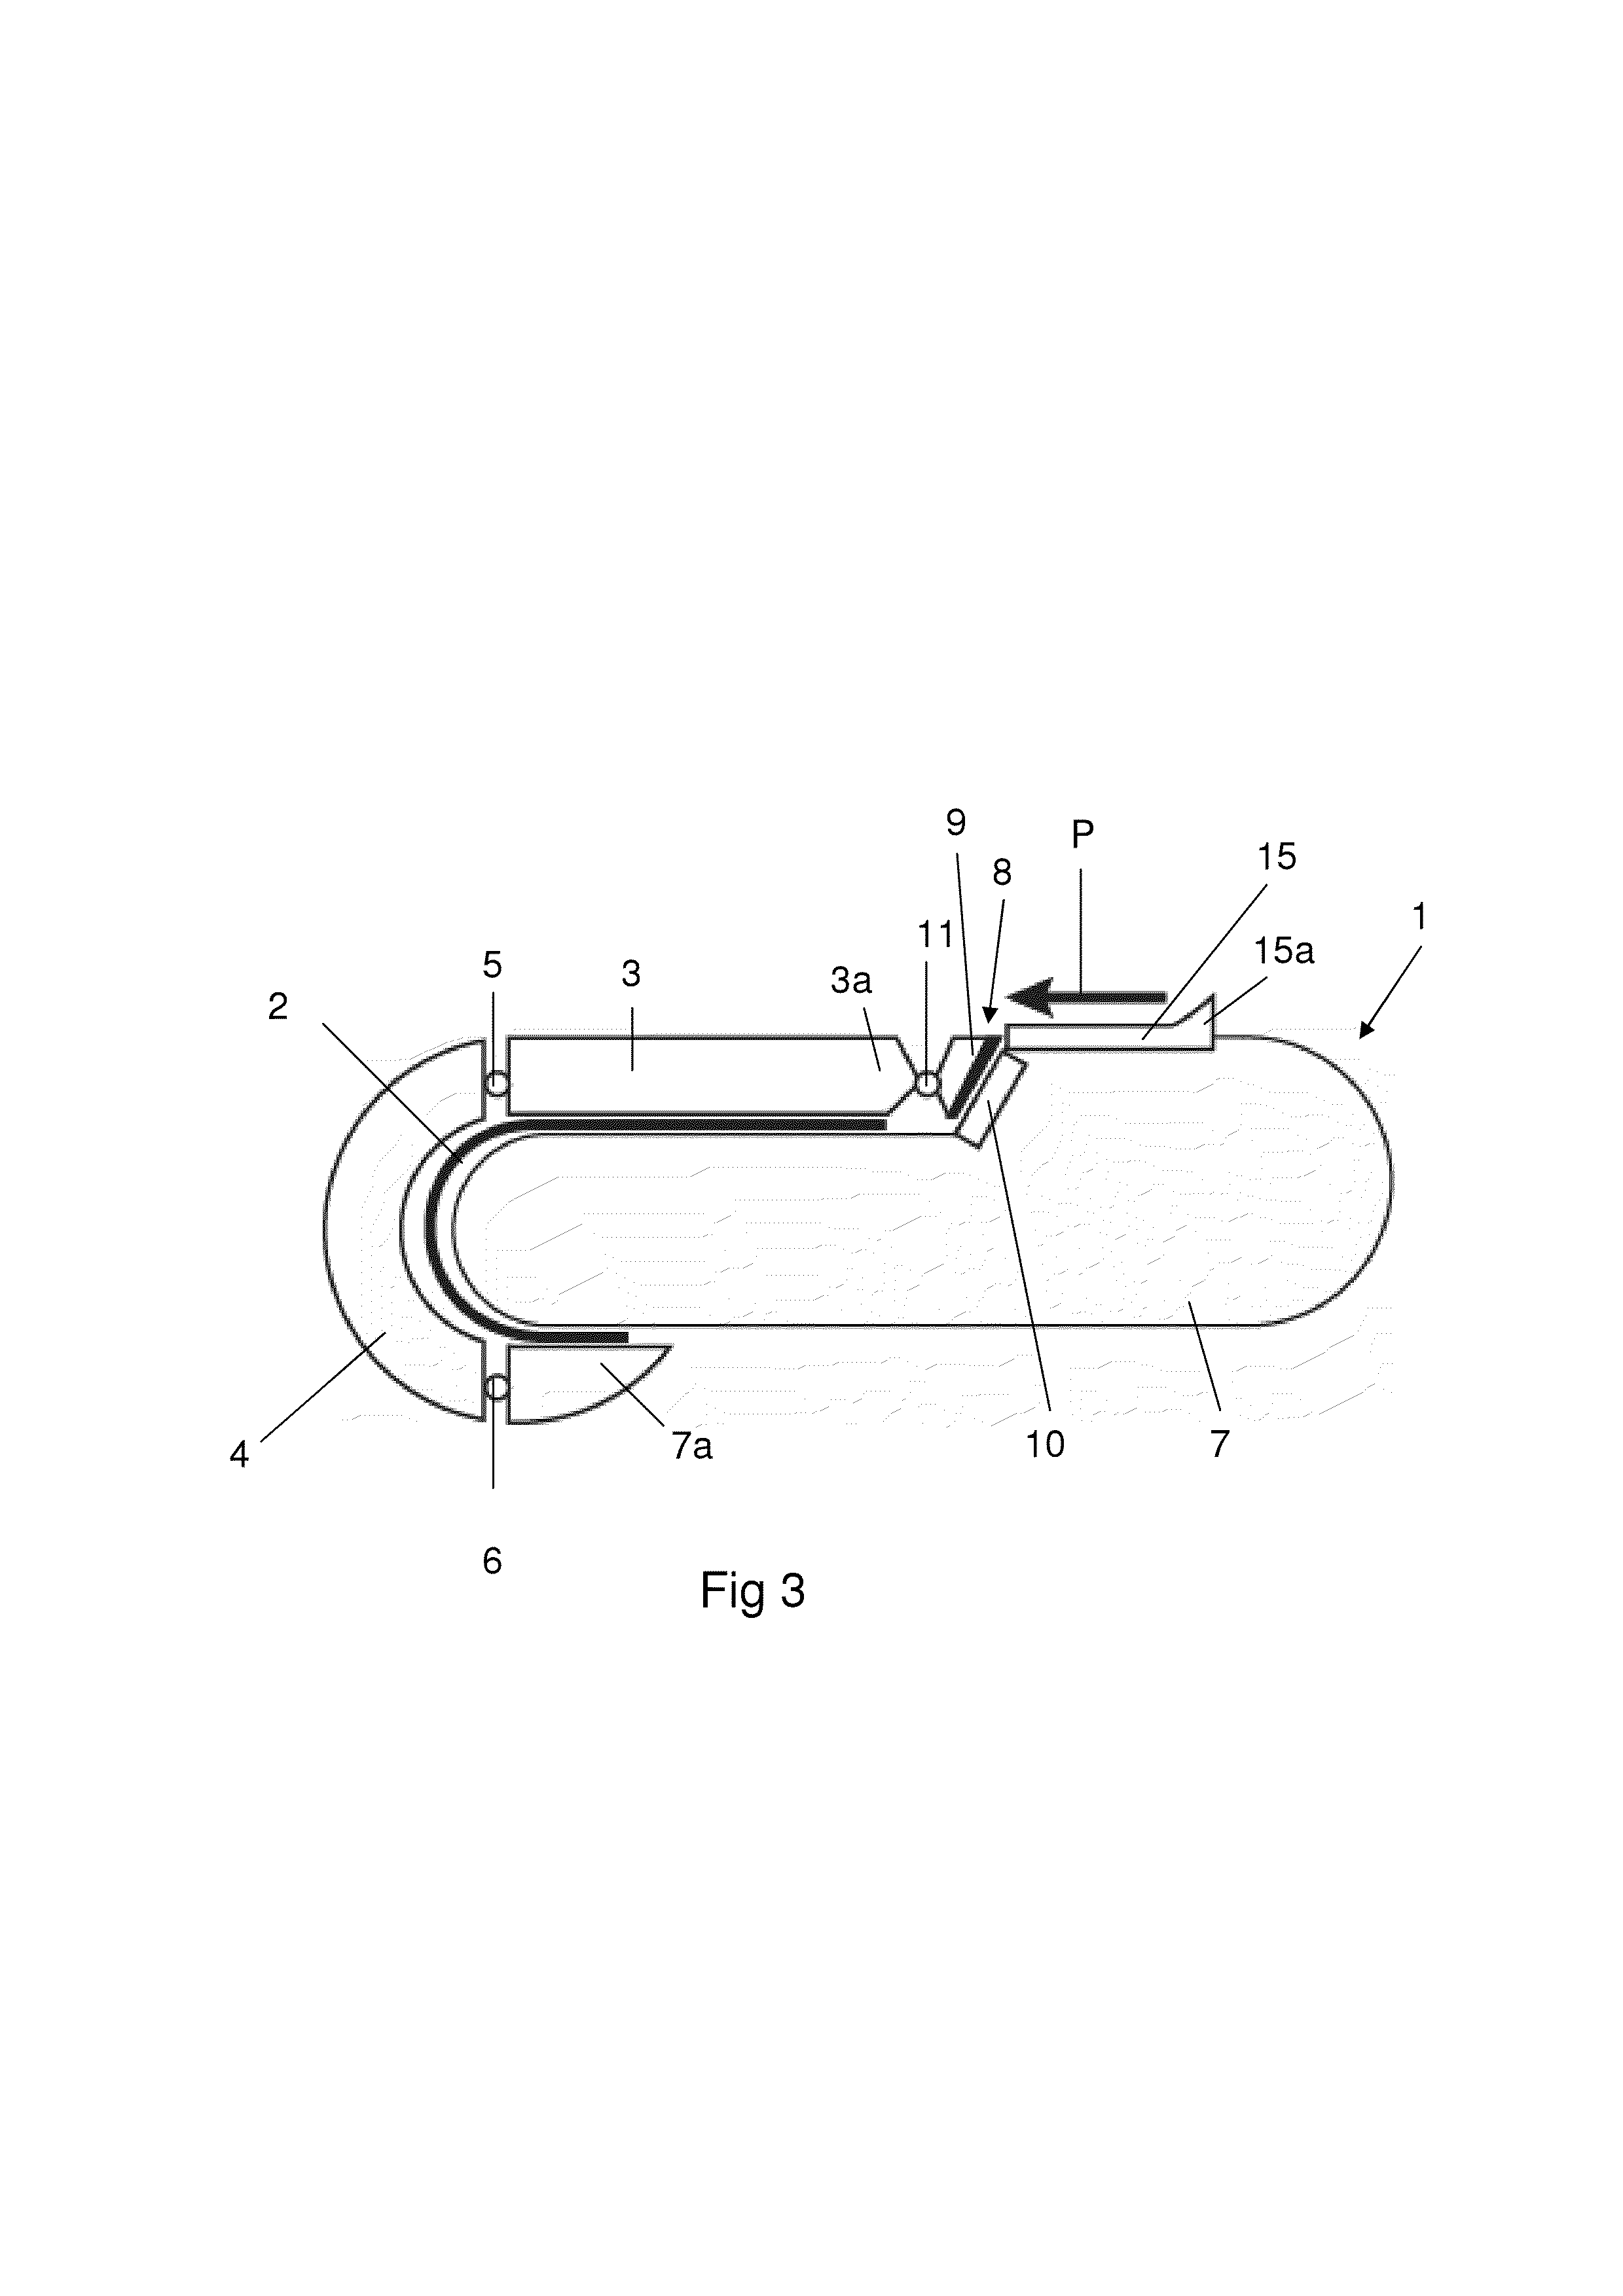 Display device with flexible display